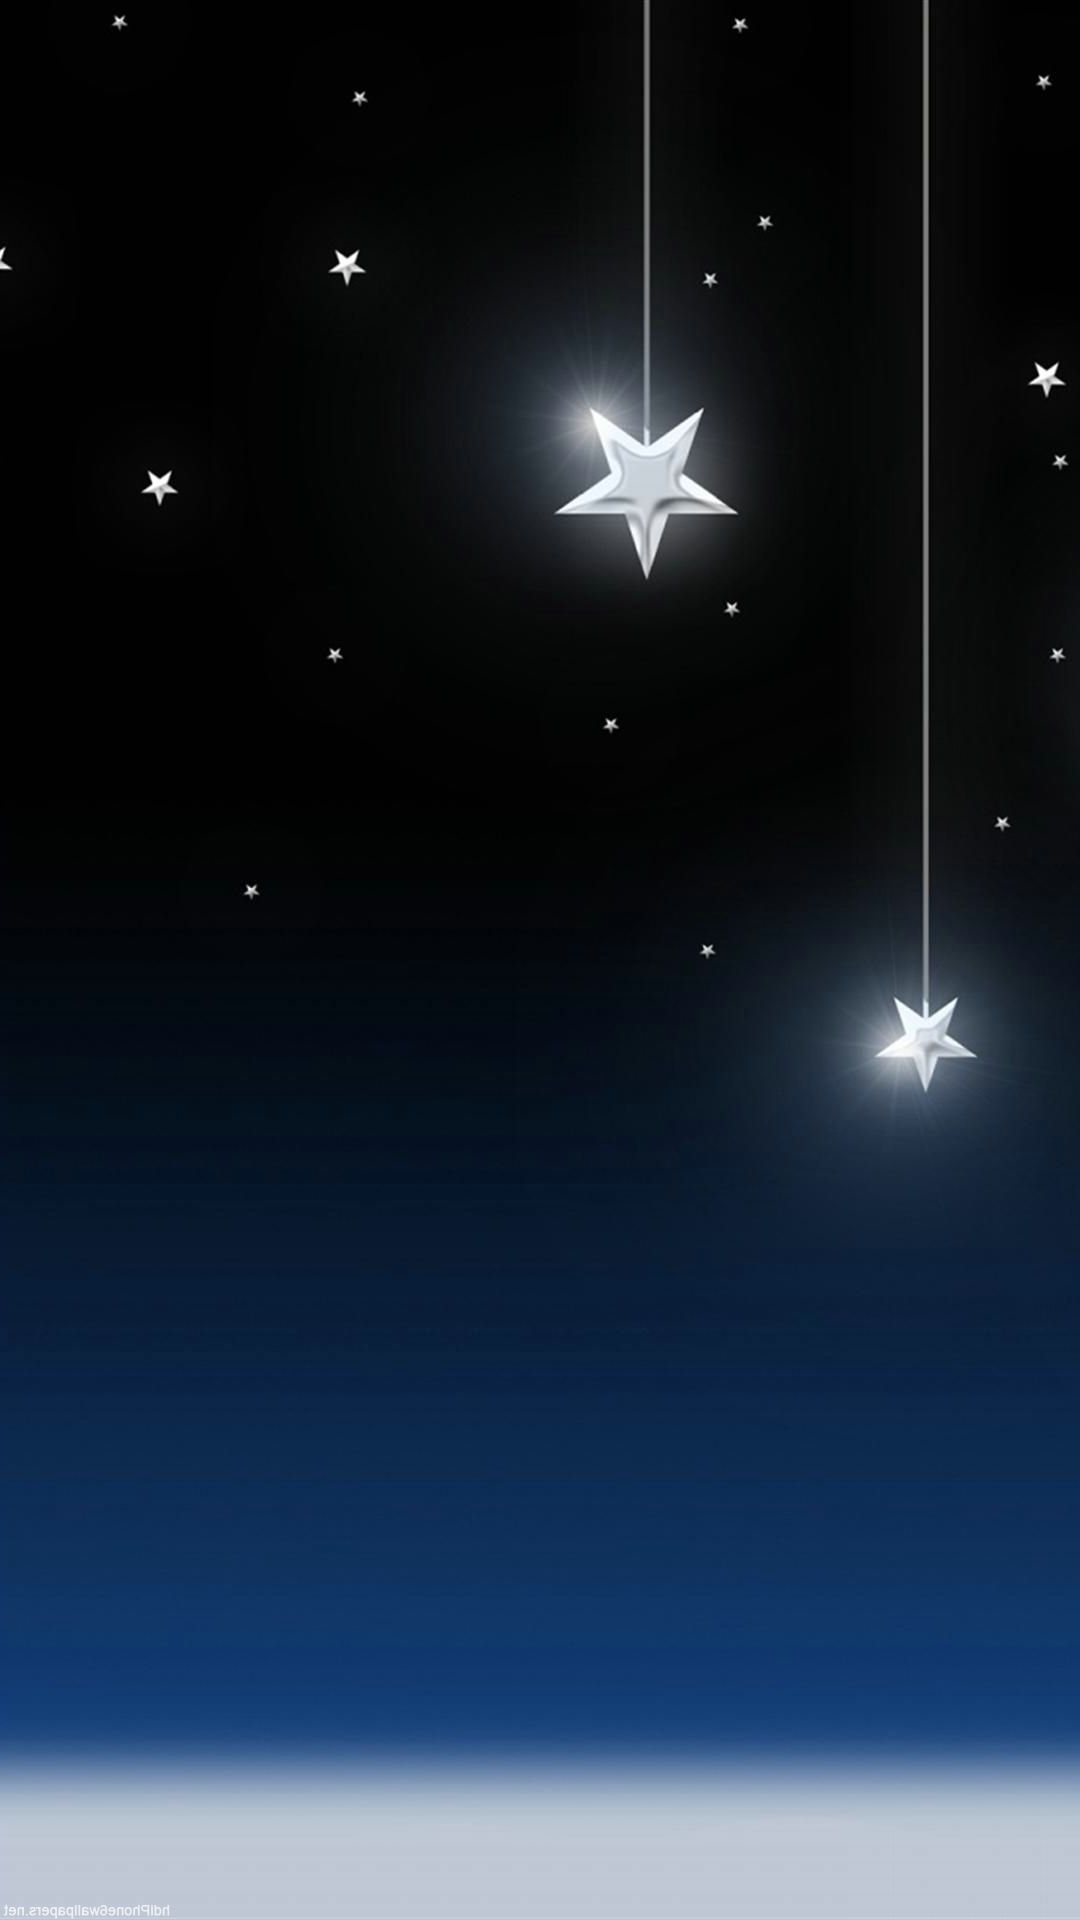 Stars Wallpaper For Android Best iPhone Star